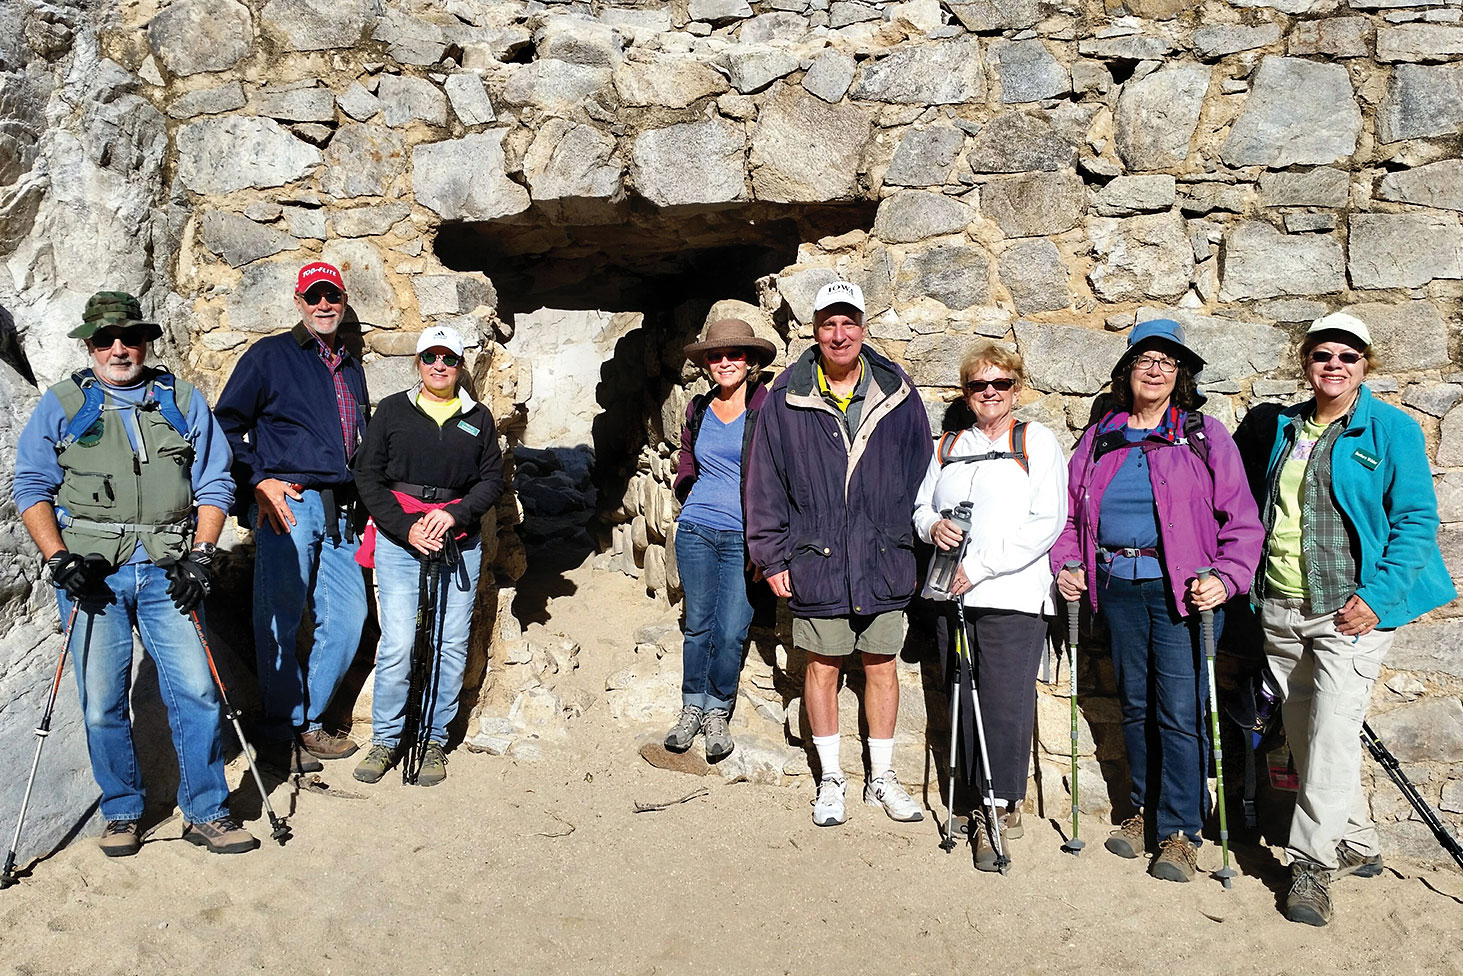 Hole in the Wall Gang at Honeybee Canyon, SaddleBrooke Hiking Club, left to right: Mark Schwartz, William Brown, Georgette Brown, Lola Lee, Dave Sorenson, Marge Thor, Barb Nicholson, Barbara Wilder; photo by Karen Schickedanz.